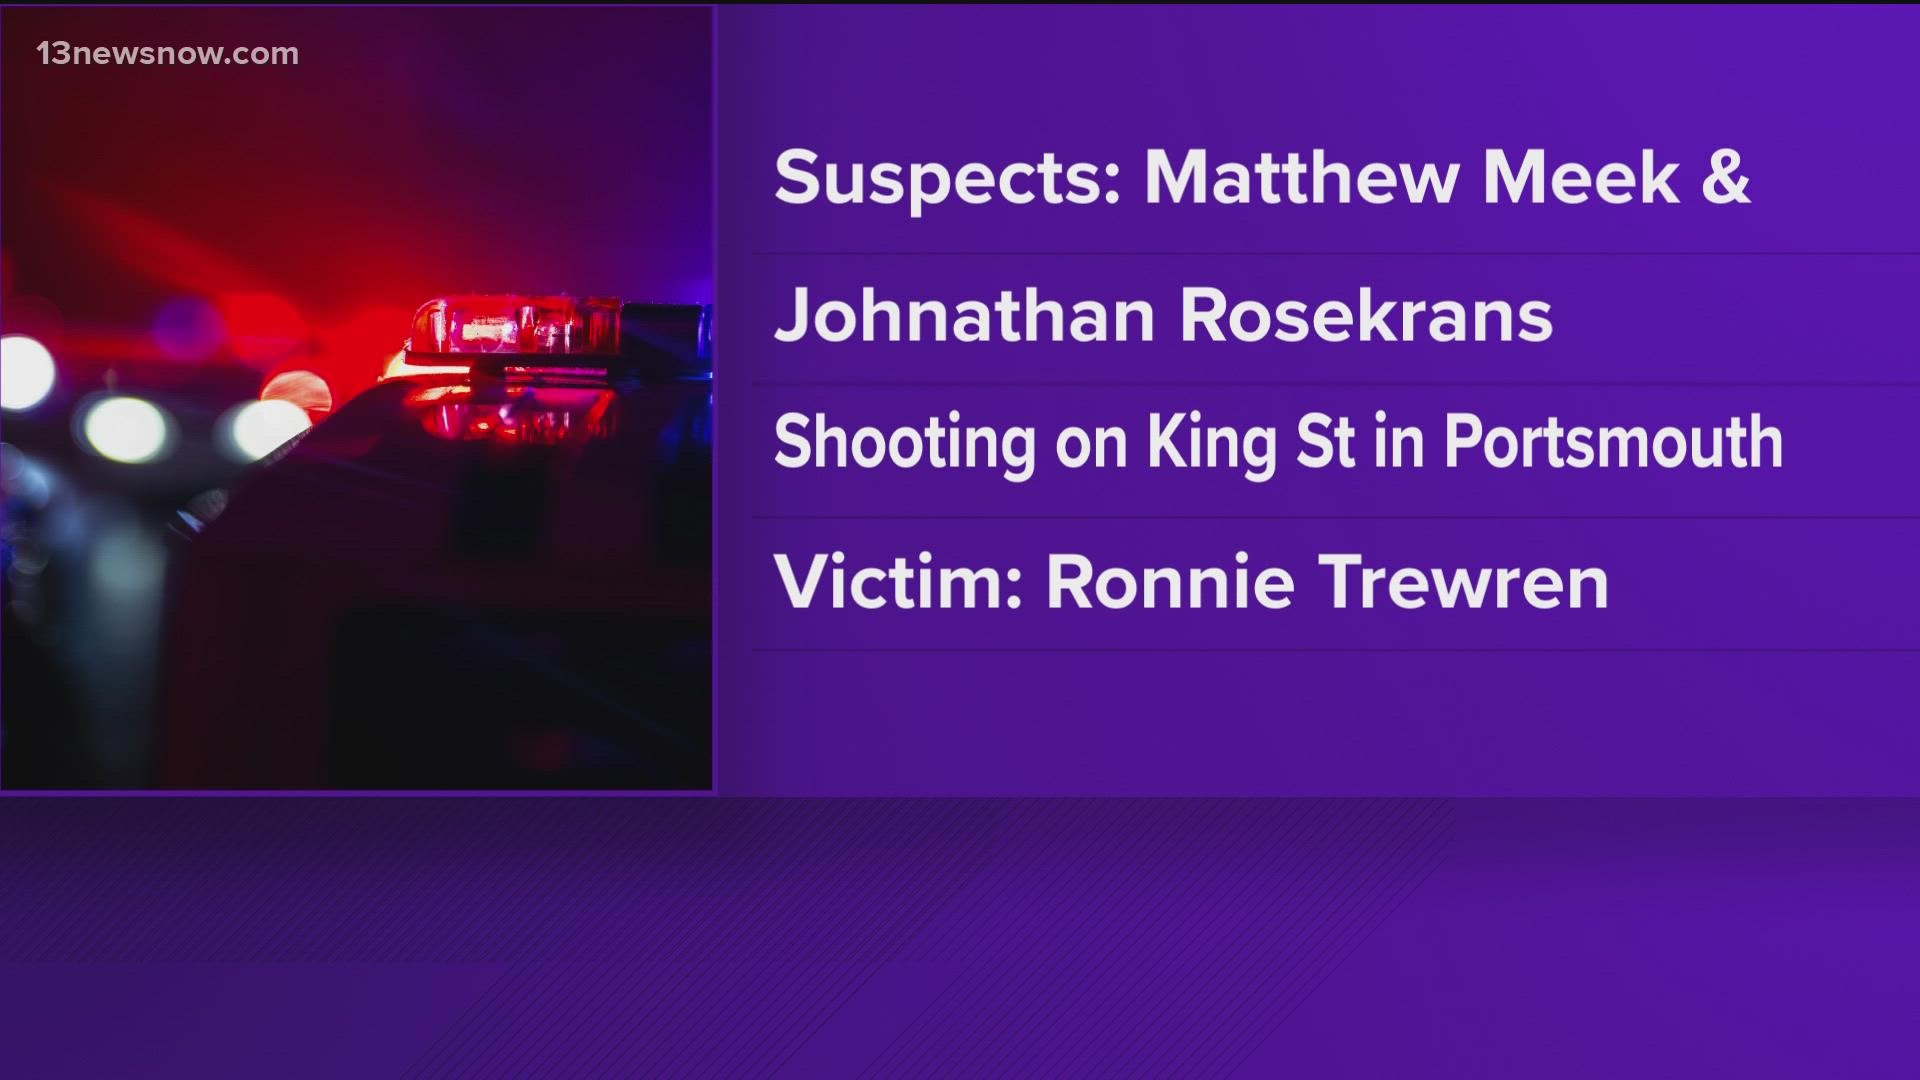 Johnathan Rosekrans and Matthew Meek were wanted for the December 5 murder of Ronnie Trewren in Portsmouth.